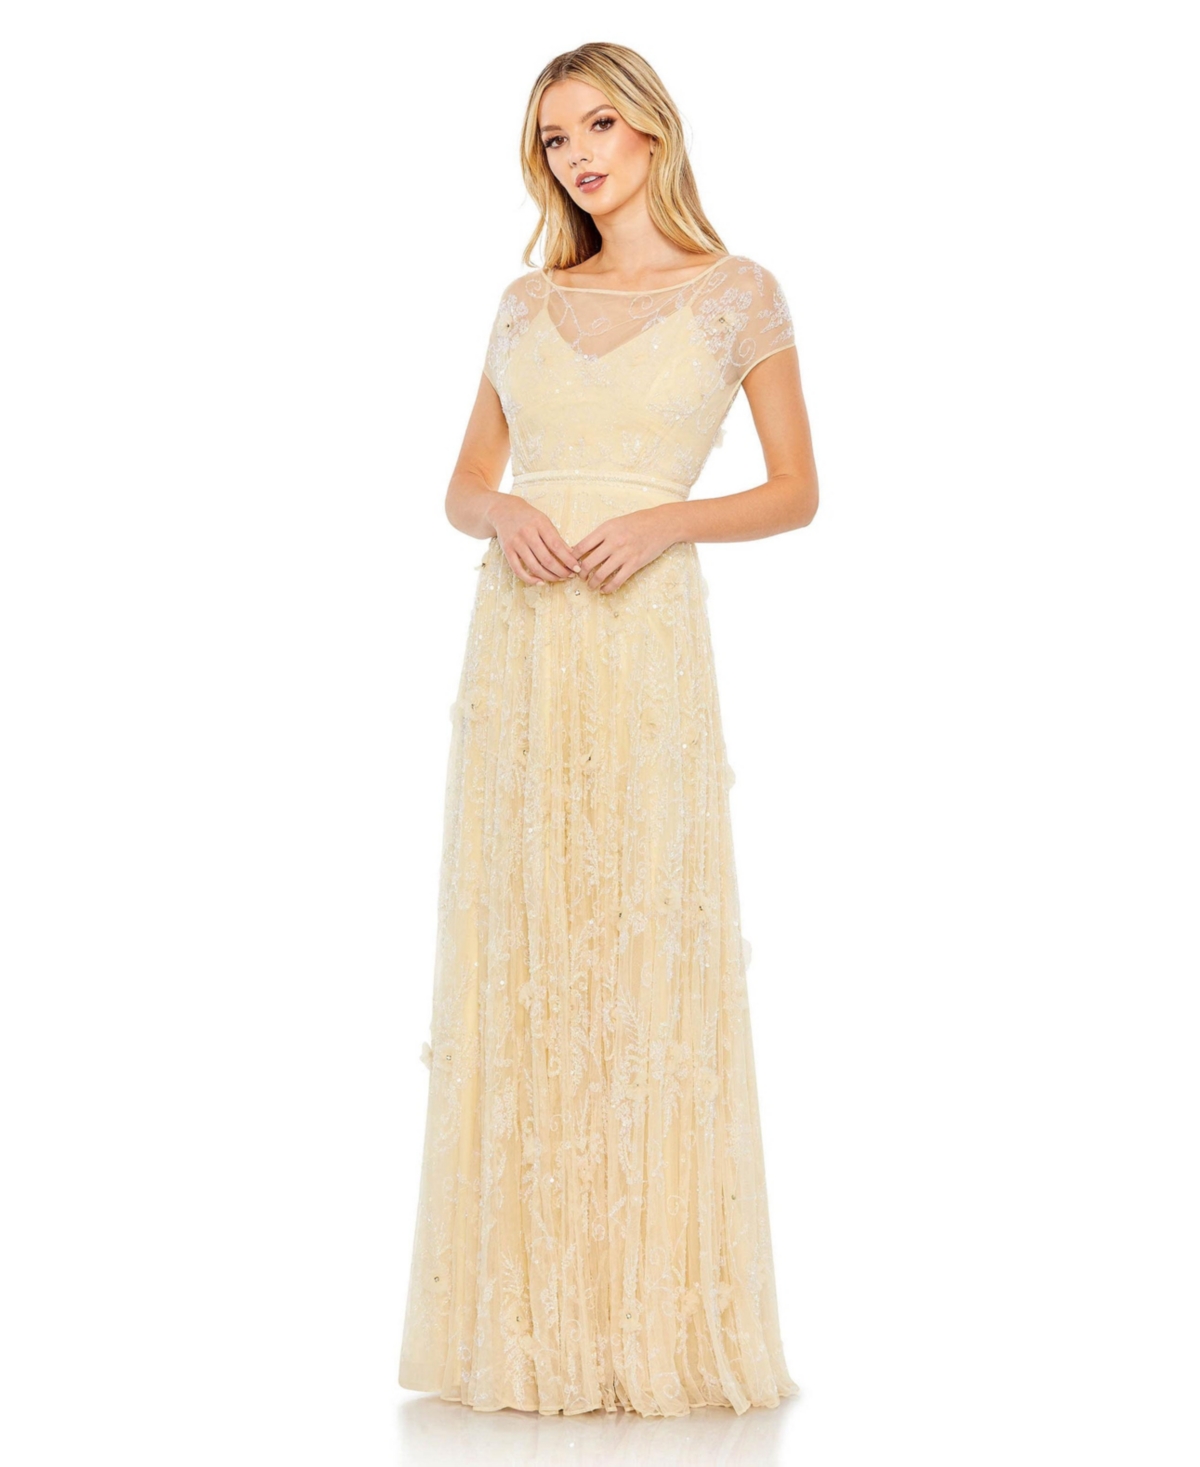 Women's Embellished Illusion Cap Sleeve Gown - Buttercup